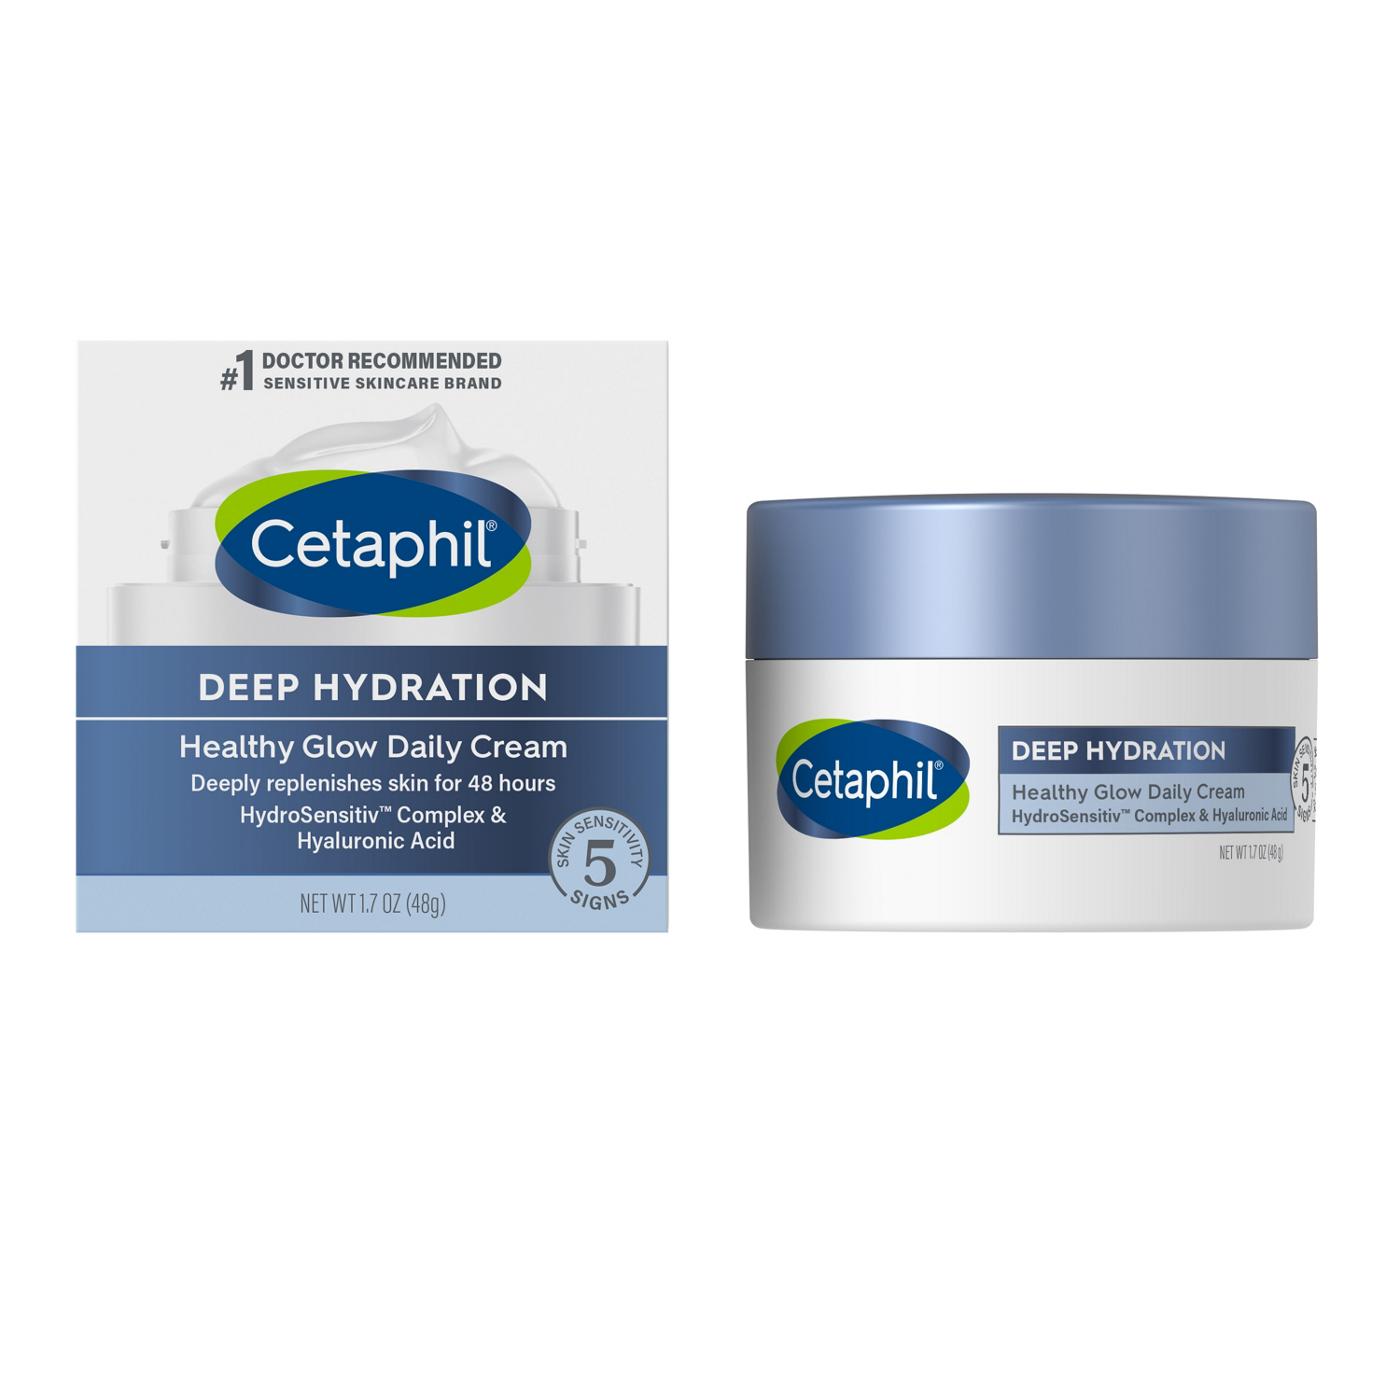 Cetaphil Deep Hydration Healthy Glow Daily Cream; image 4 of 8